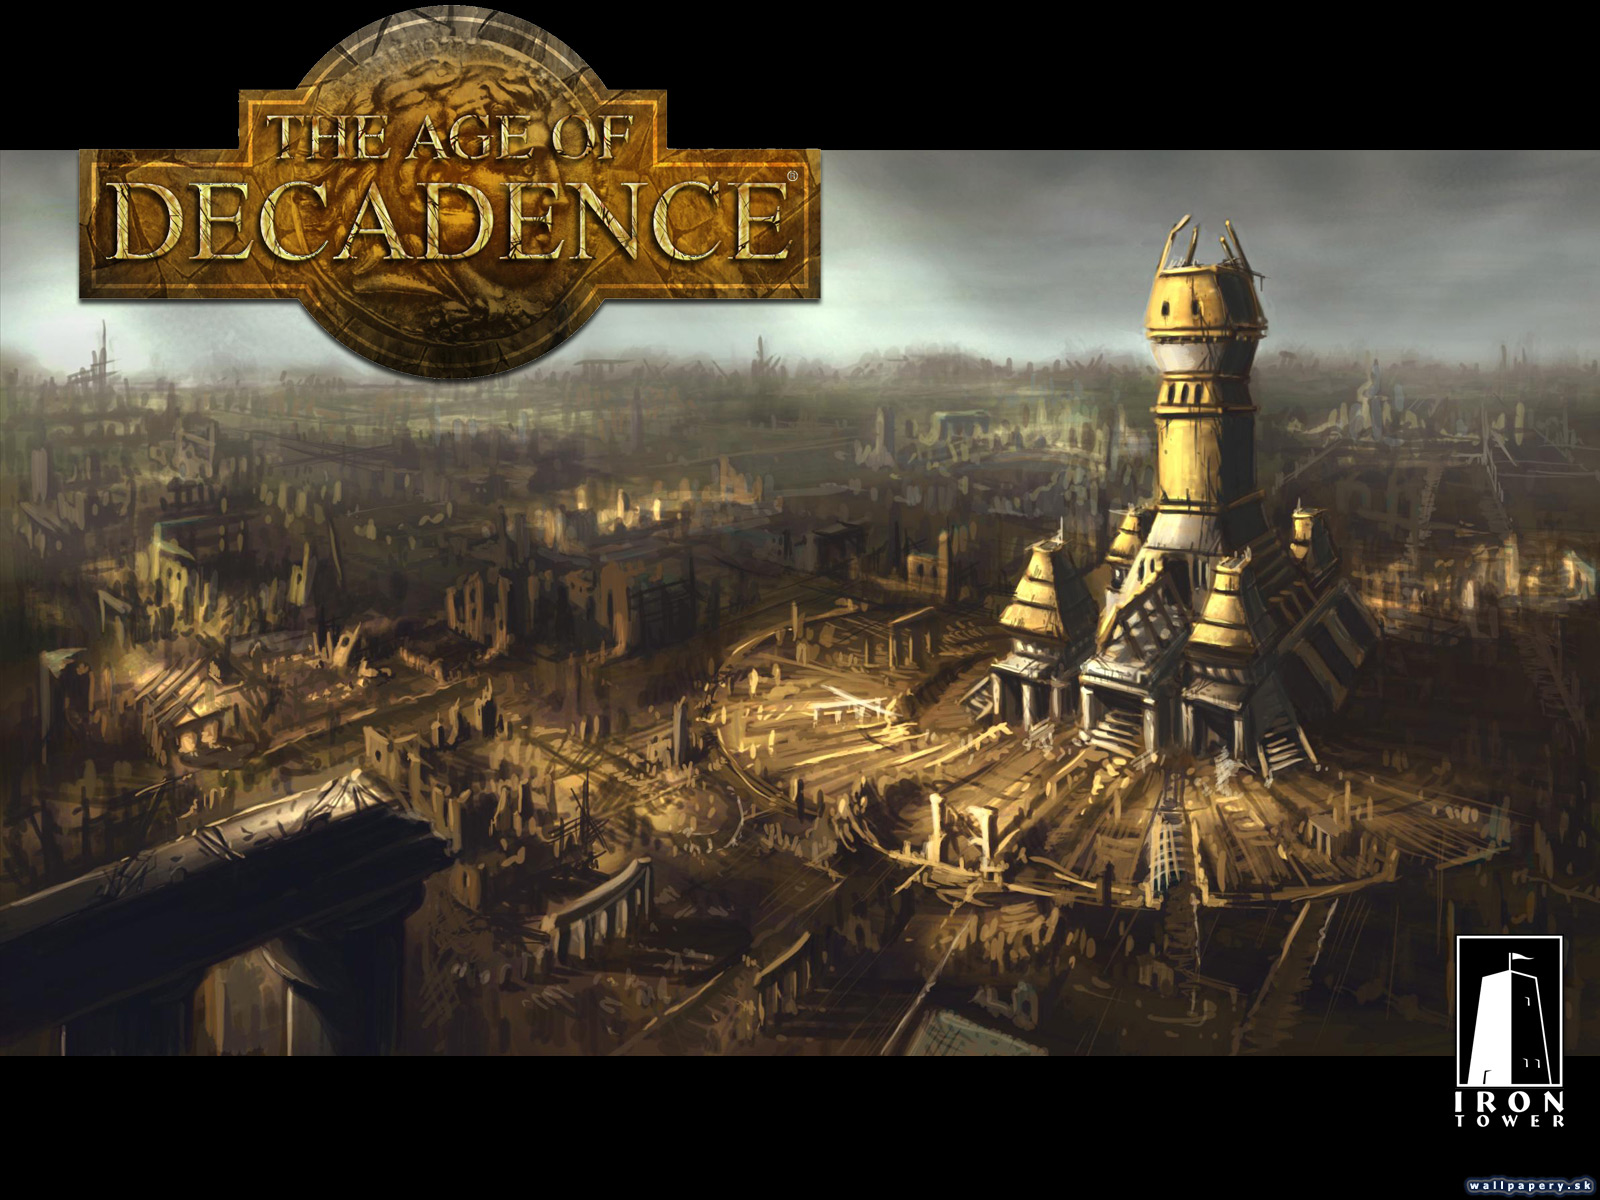 The Age of Decadence - wallpaper 1